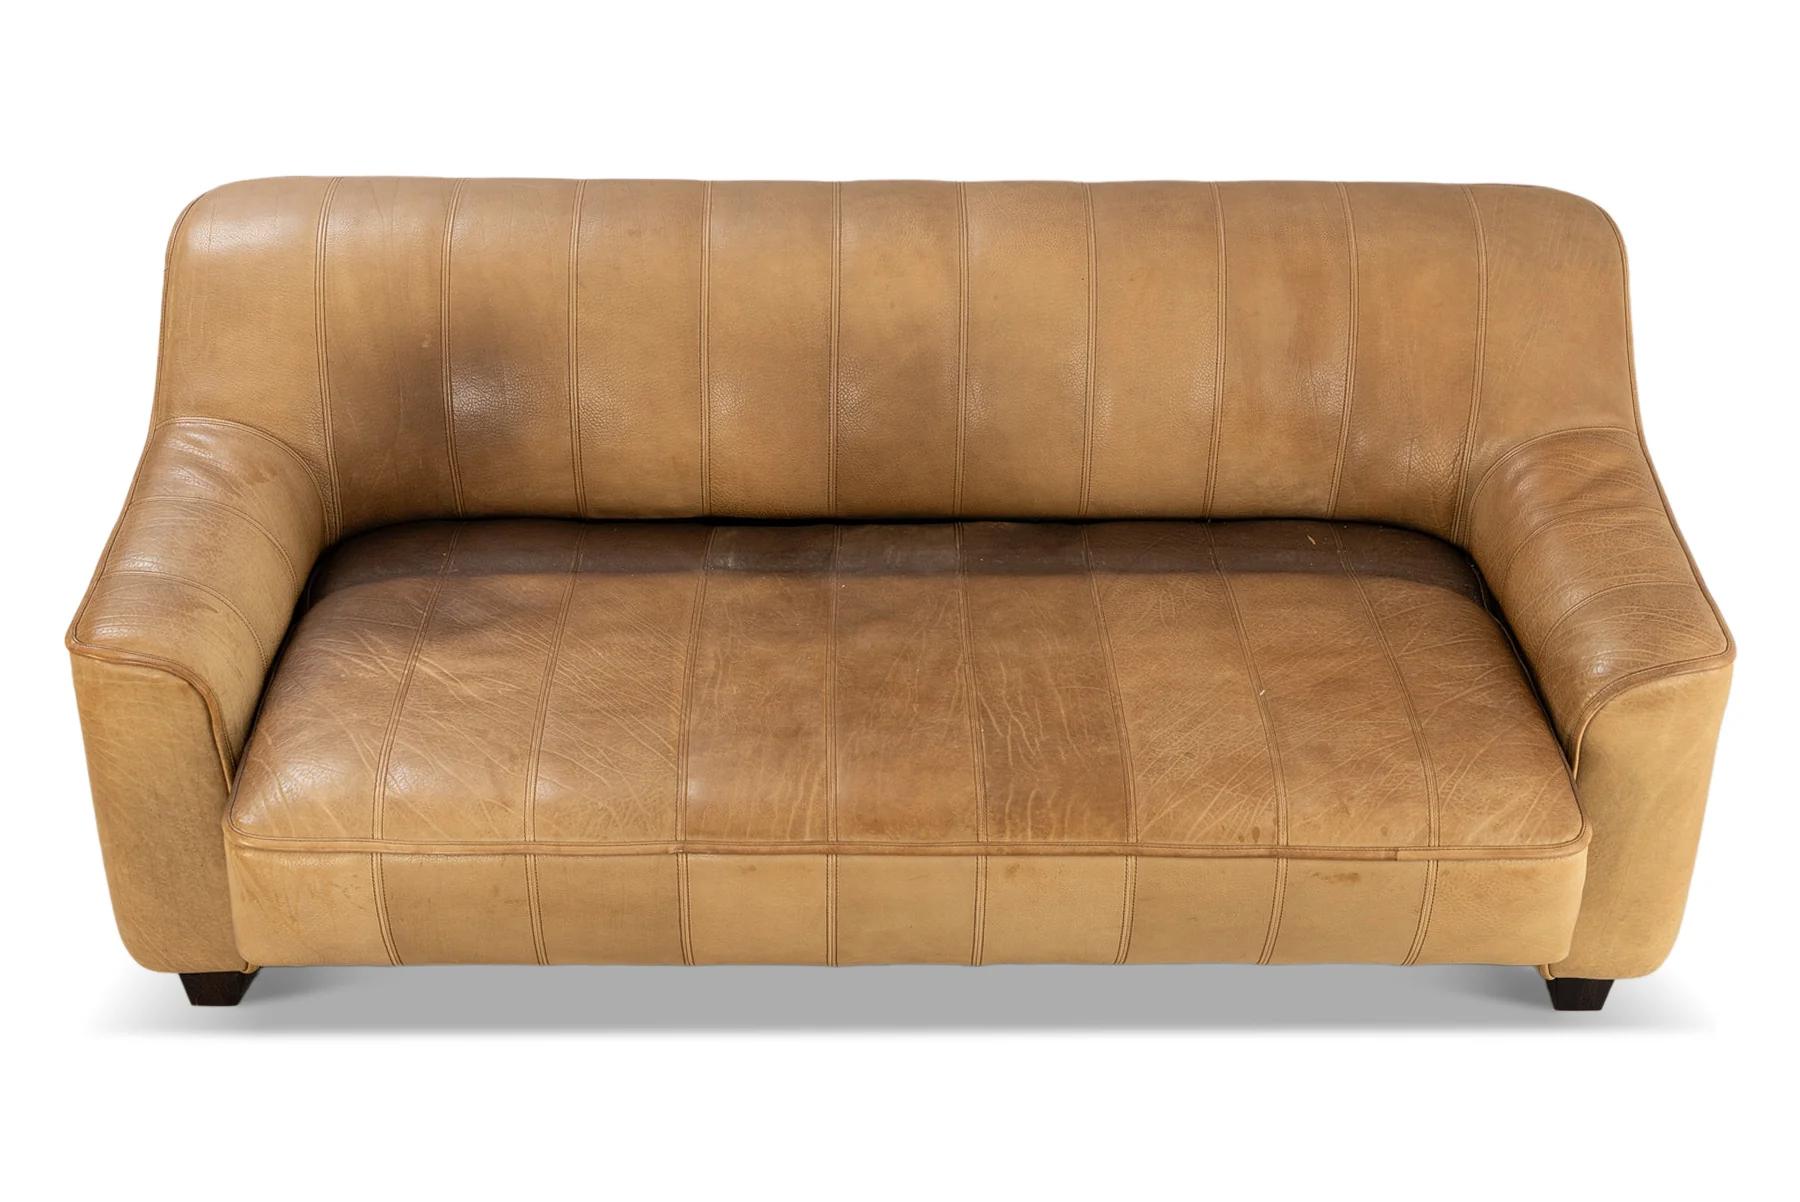 Mid-Century Modern Ds 44 three seat sofa in buffalo leather by desede For Sale